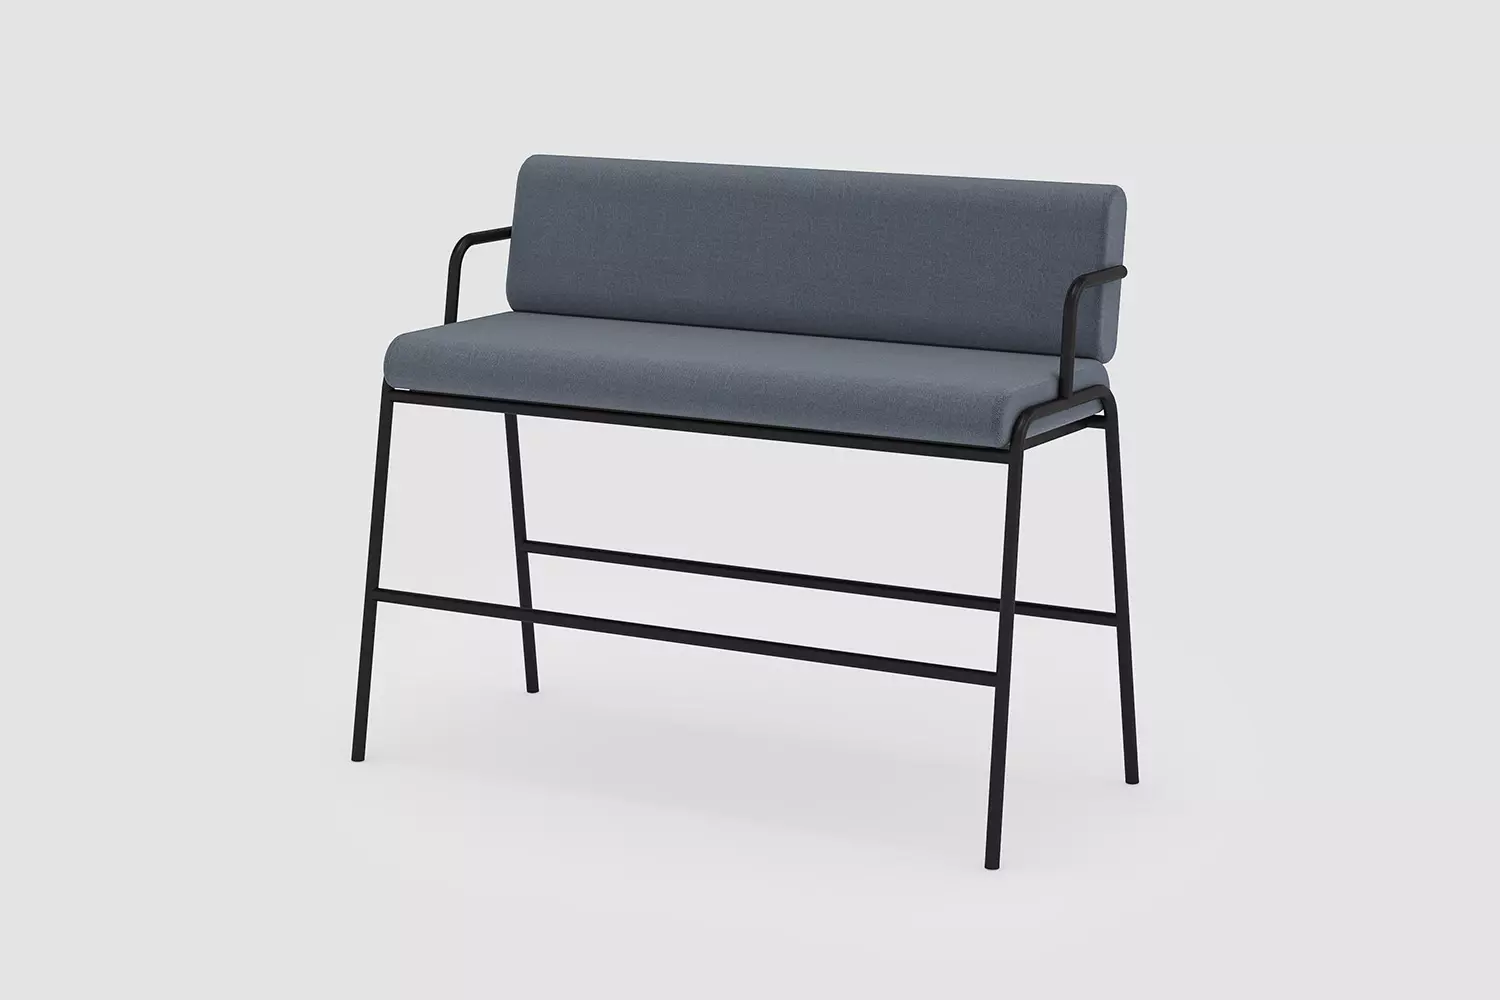 CASUAL Outdoor bench high, Outdoor Upholstered Without armrests With armrests Bench Modular system, Bene Office furniture, Image 1